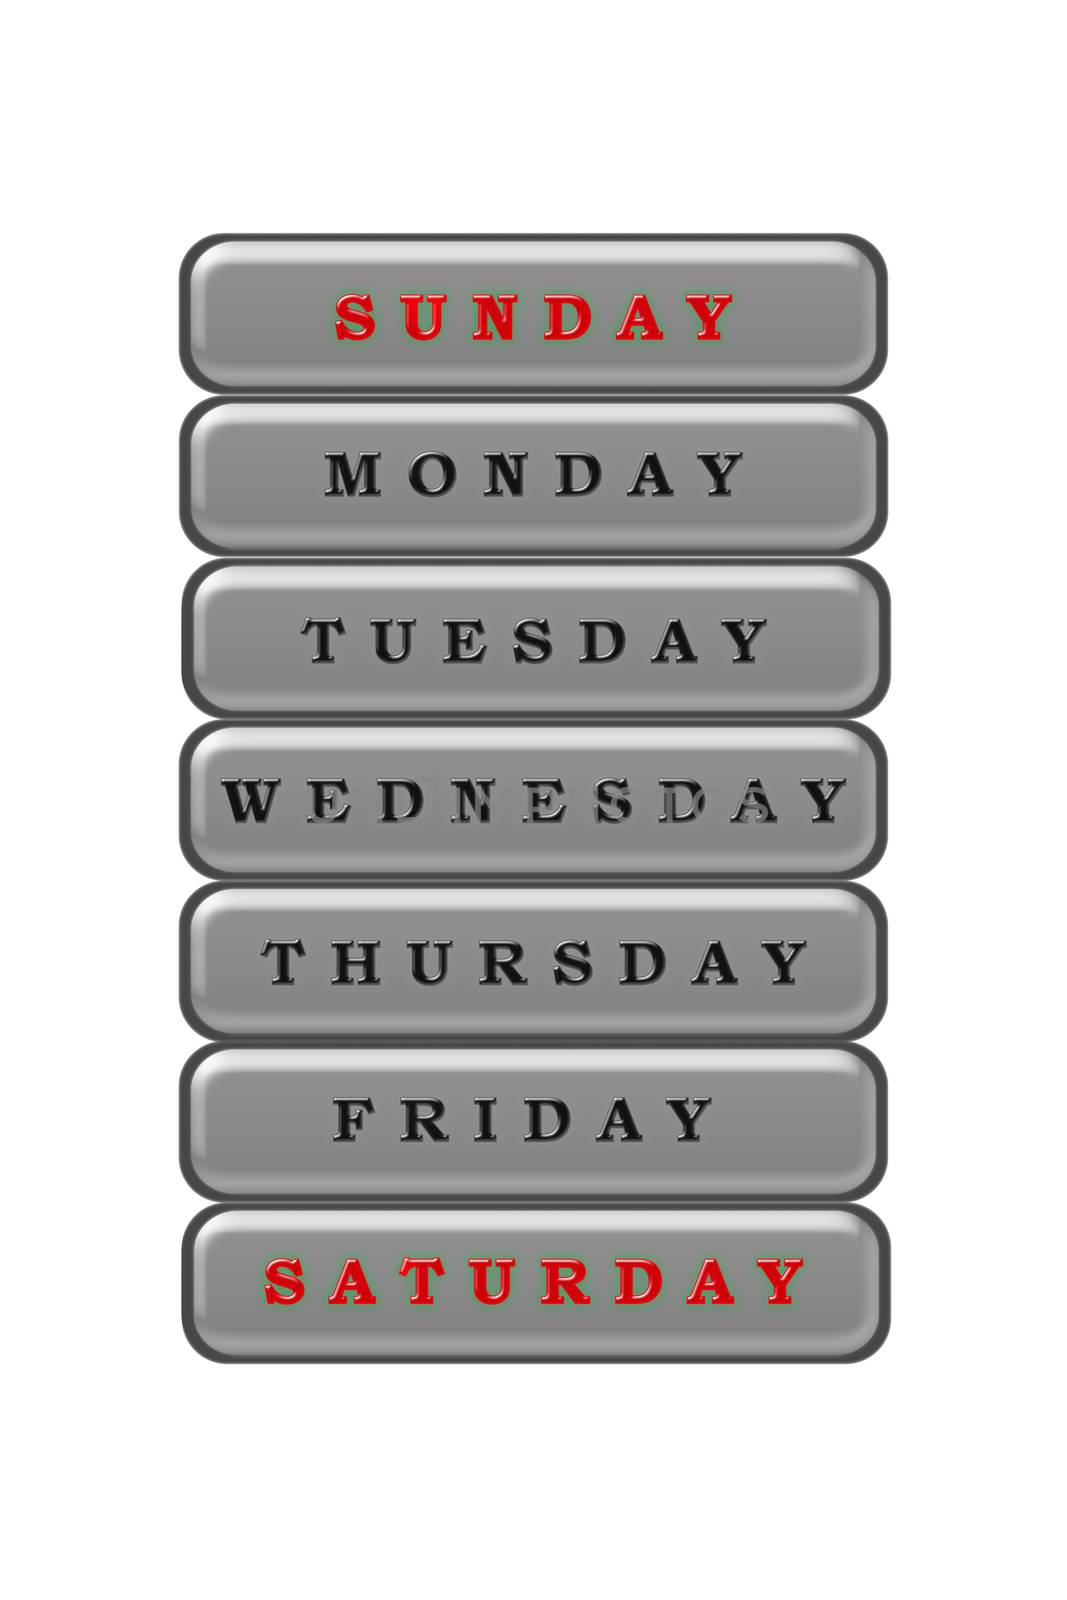 Among the list of days of the week, Saturday and Sunday are highlighted in red on a gray background.  The rest of the days are black on a gray background.